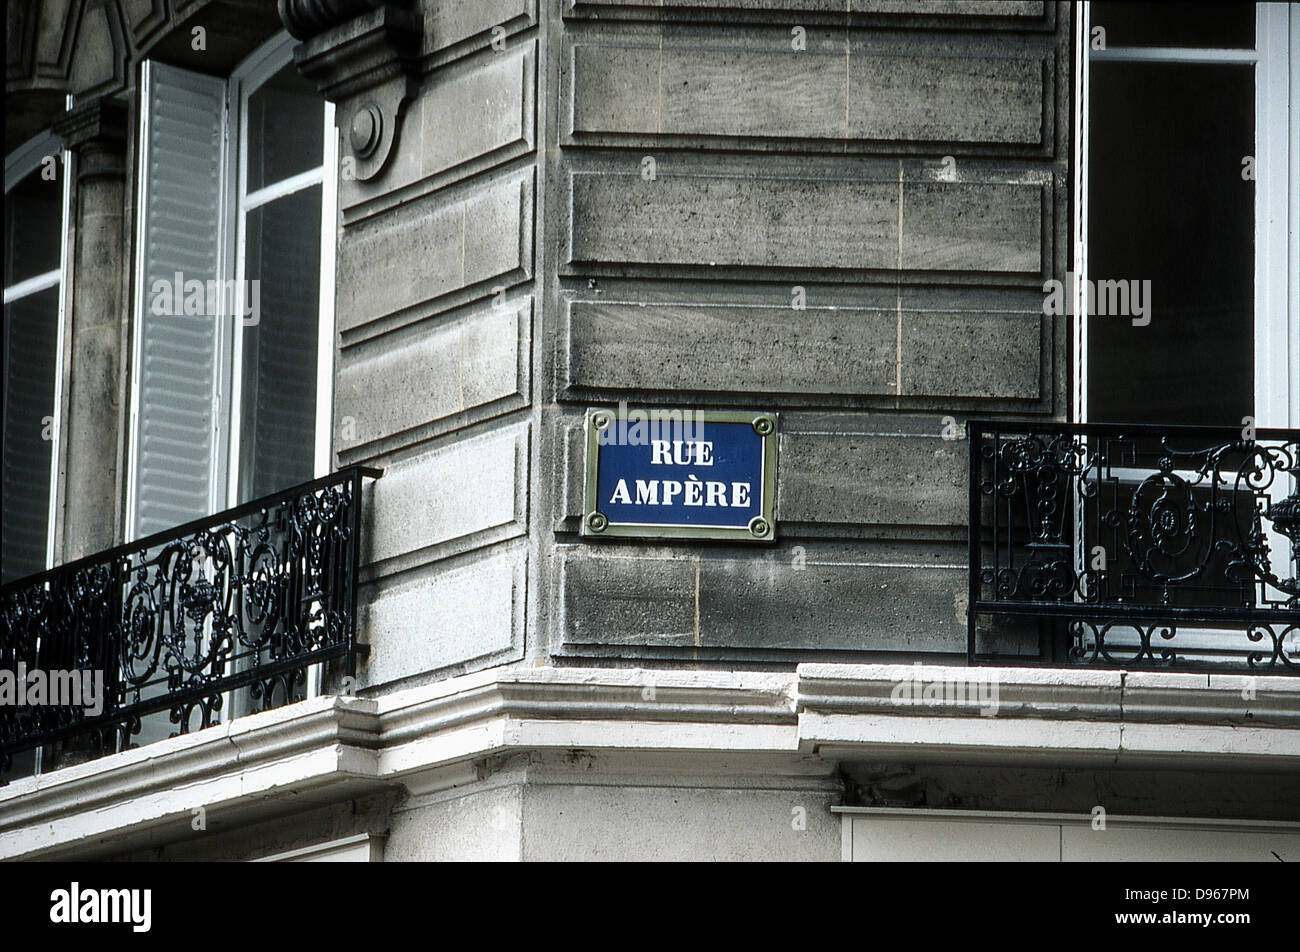 Andre Marie Ampere (1775-1836) French mathematician and physicist: Electrodynamics. Paris street sign bearing his name. Stock Photo